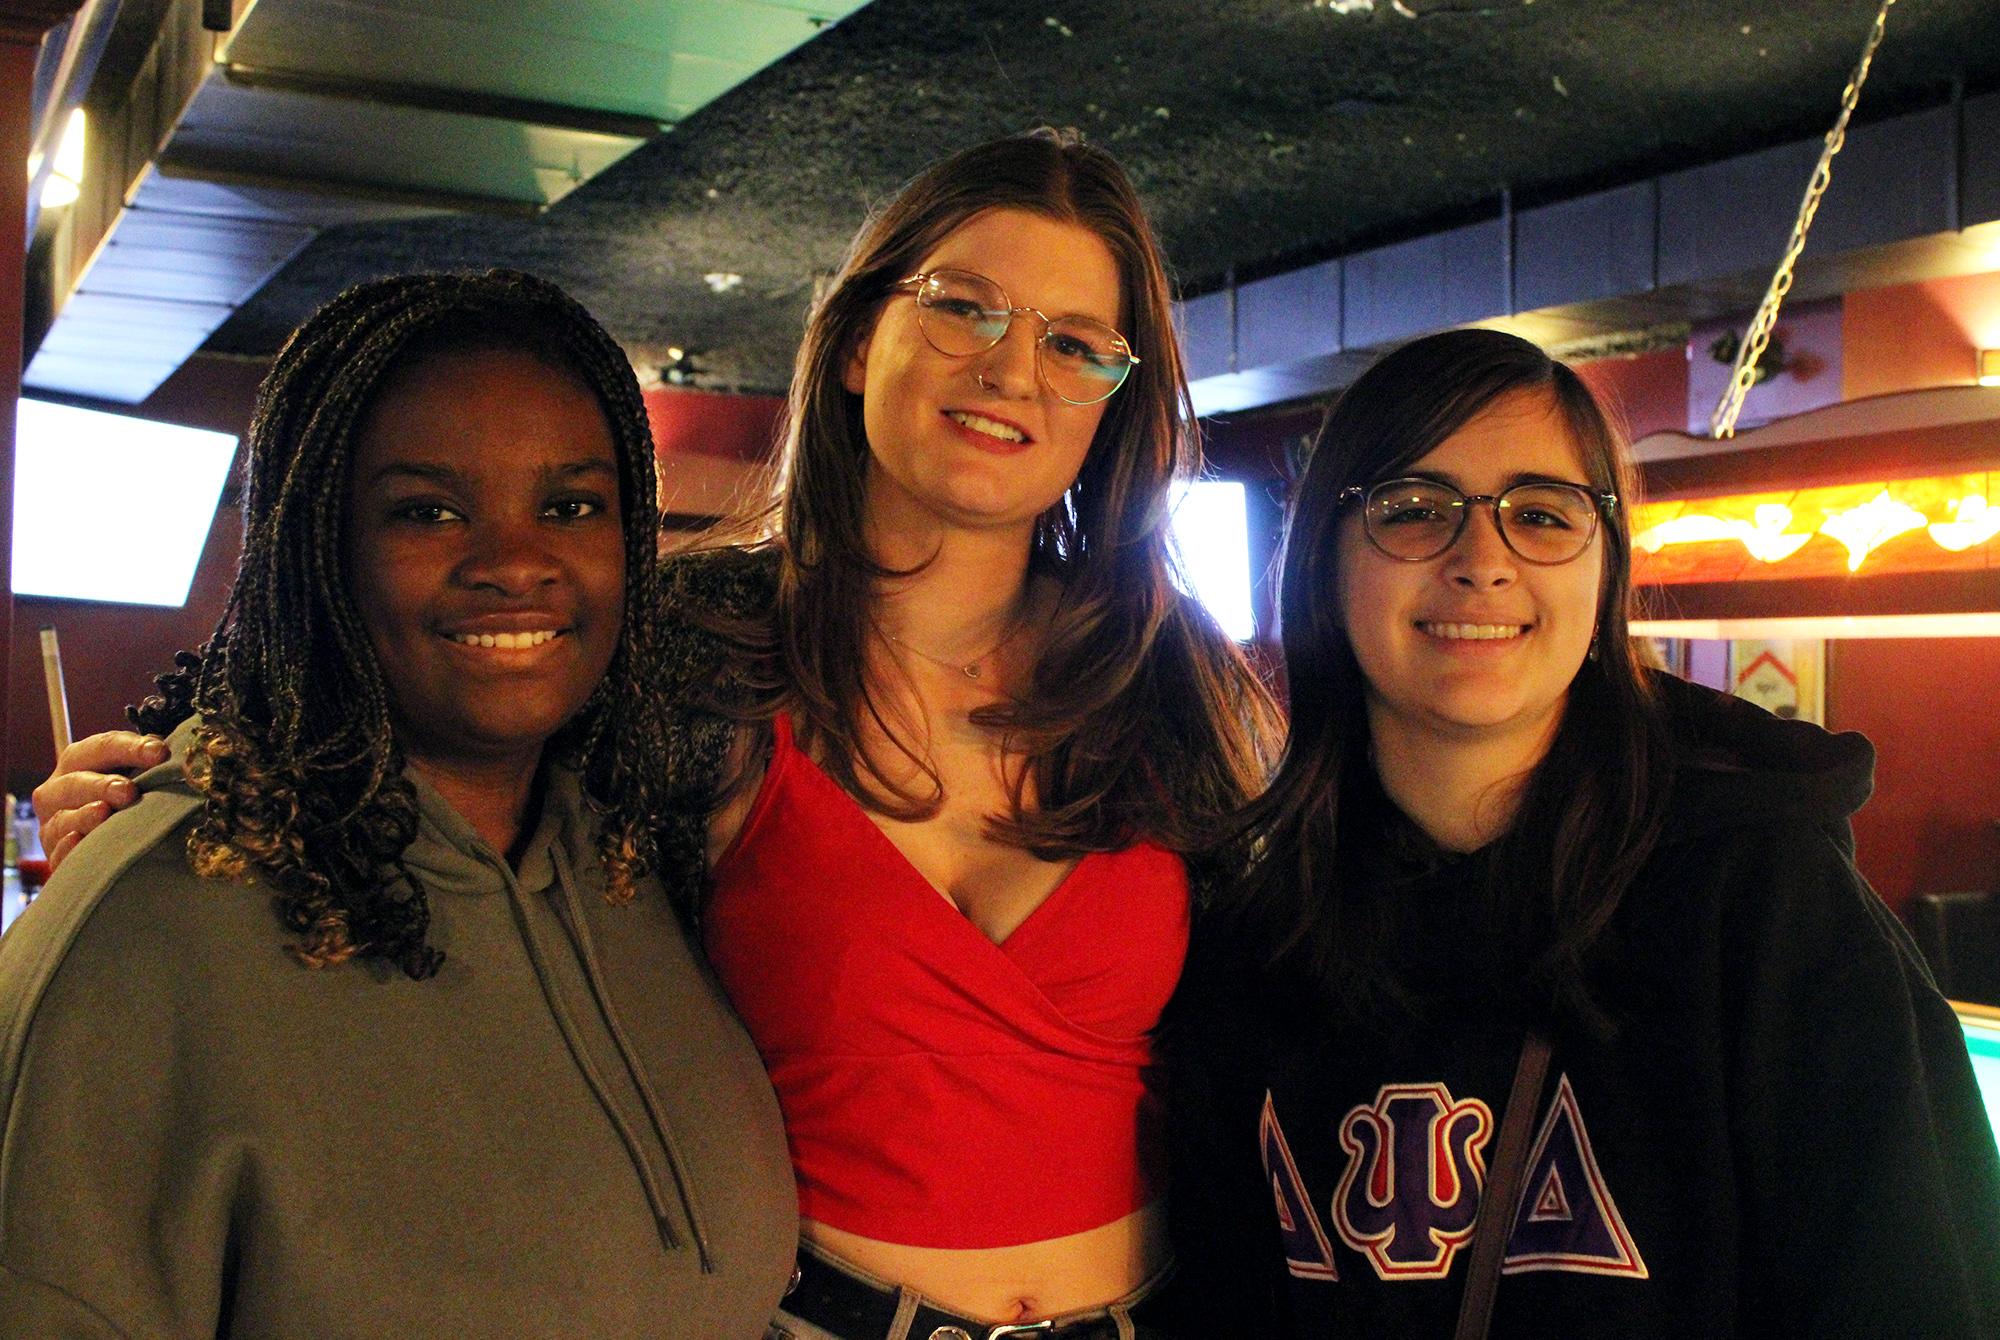 Algonquin College students and Delta Psi Delta sisters (from left to right) Karine Joseph, Jacquelyn Mills and Adriana Cote during the pool tournament at MacLaren's on Elgin on Feb. 29.